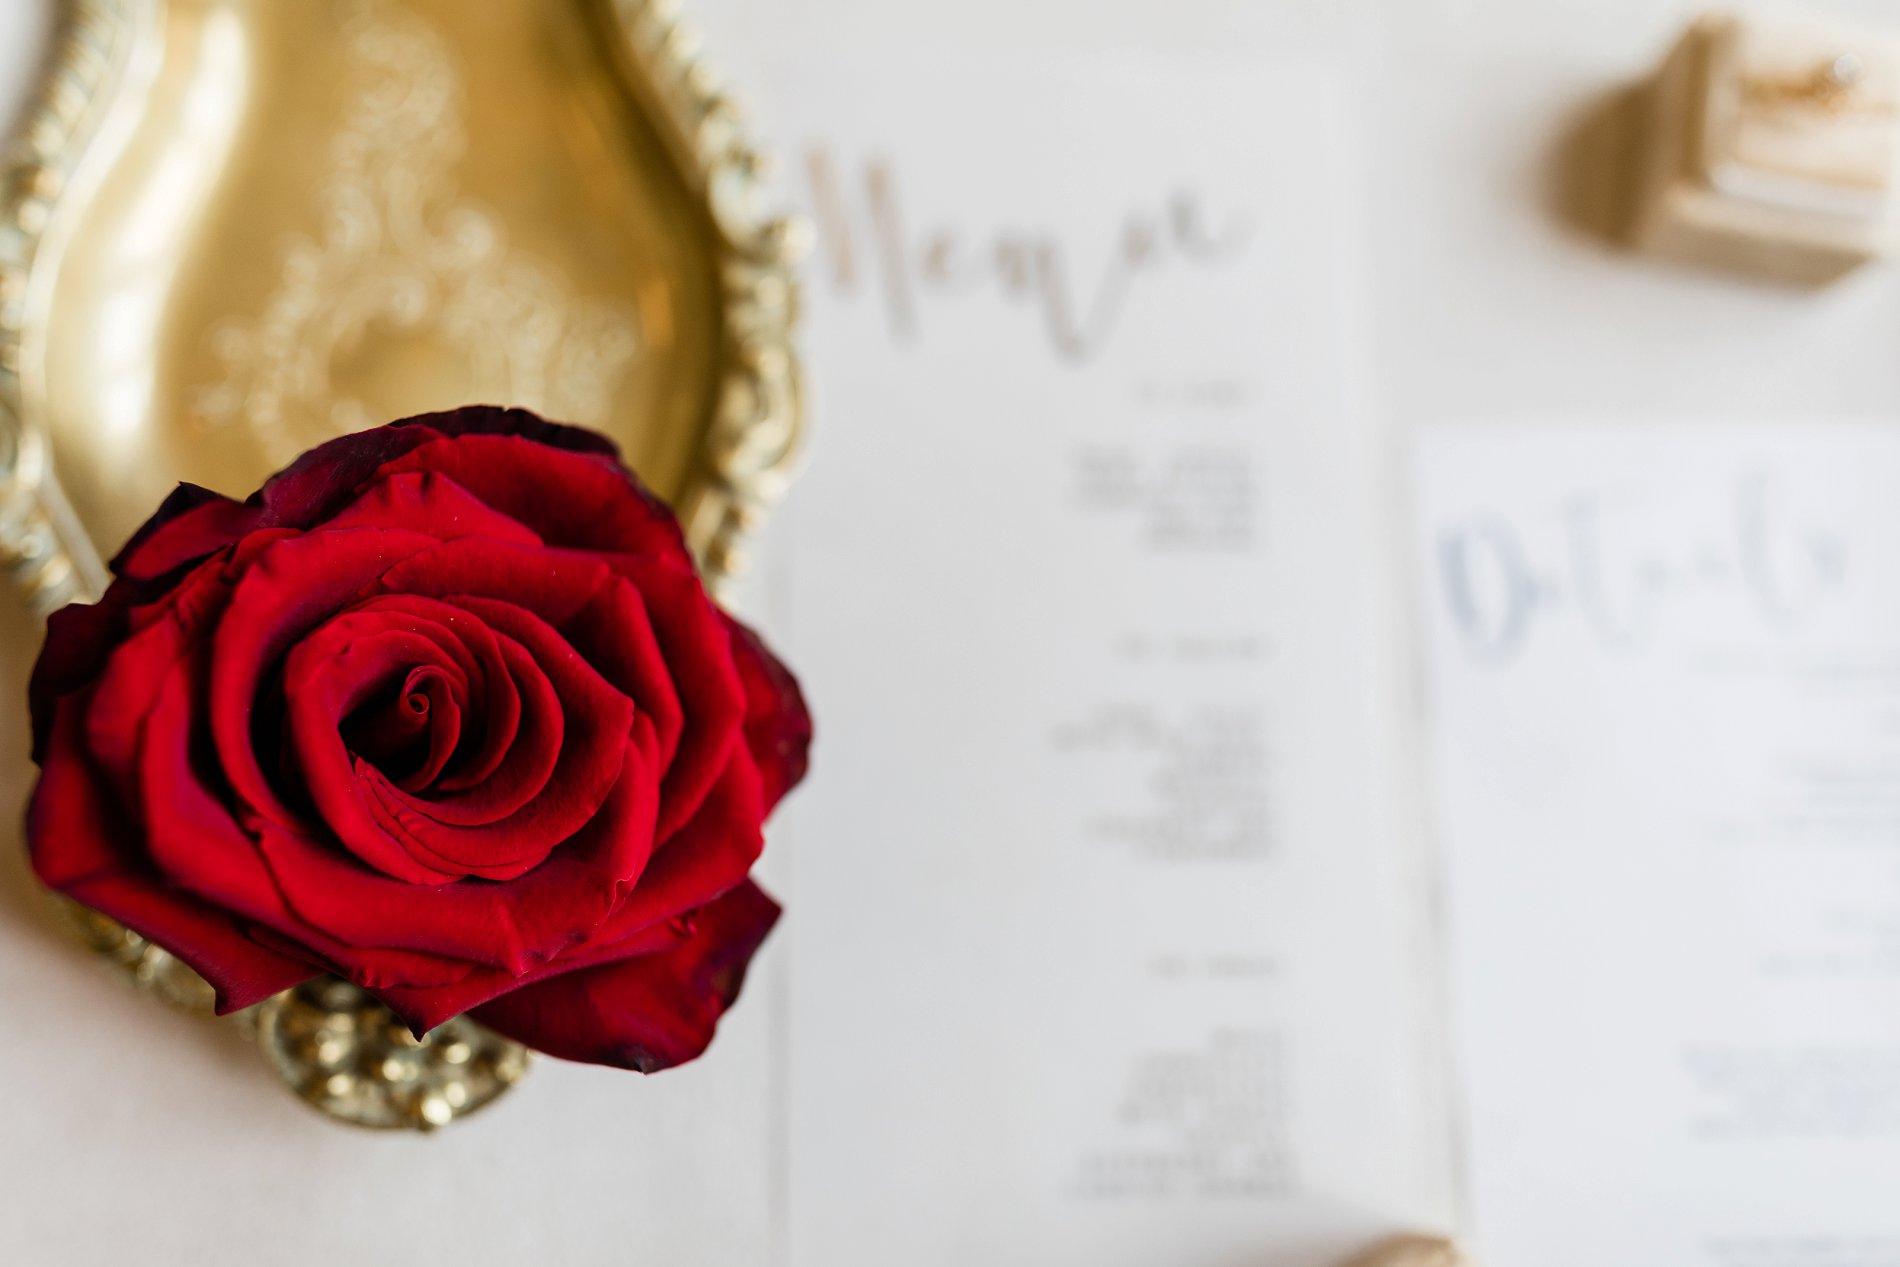 Forever Yours Styled Shoot (c) Camilla J. Hards and Courtney Dee Photography (4)